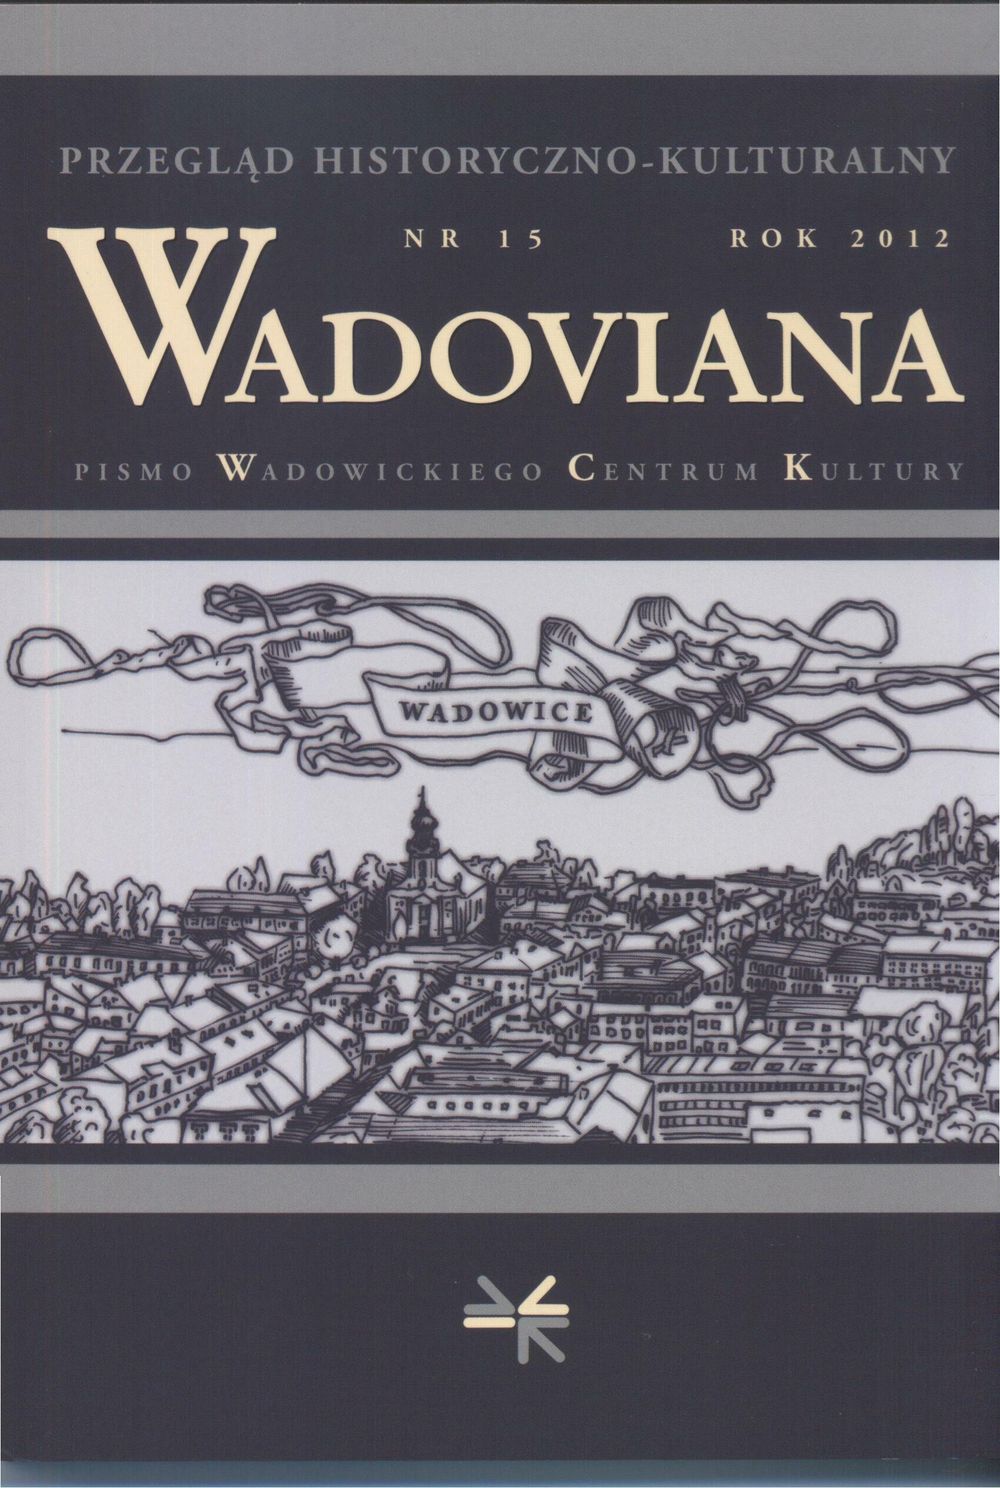 Press, books, cinema, theater and censorship in Wadowice at the turn of the 1950s and 1960s - memories of a student Cover Image